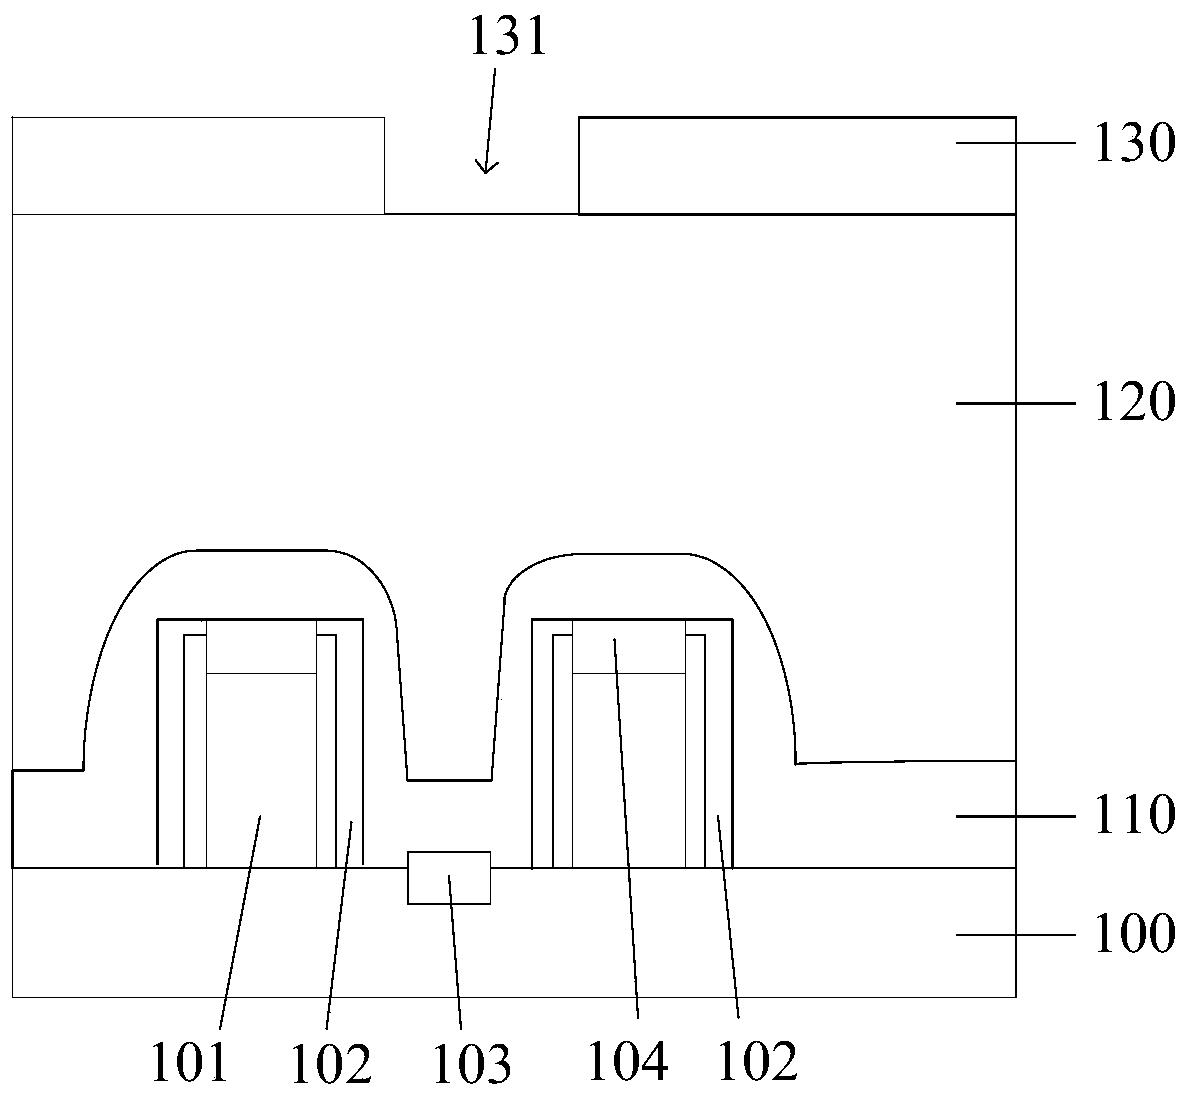 Method of forming contact plugs